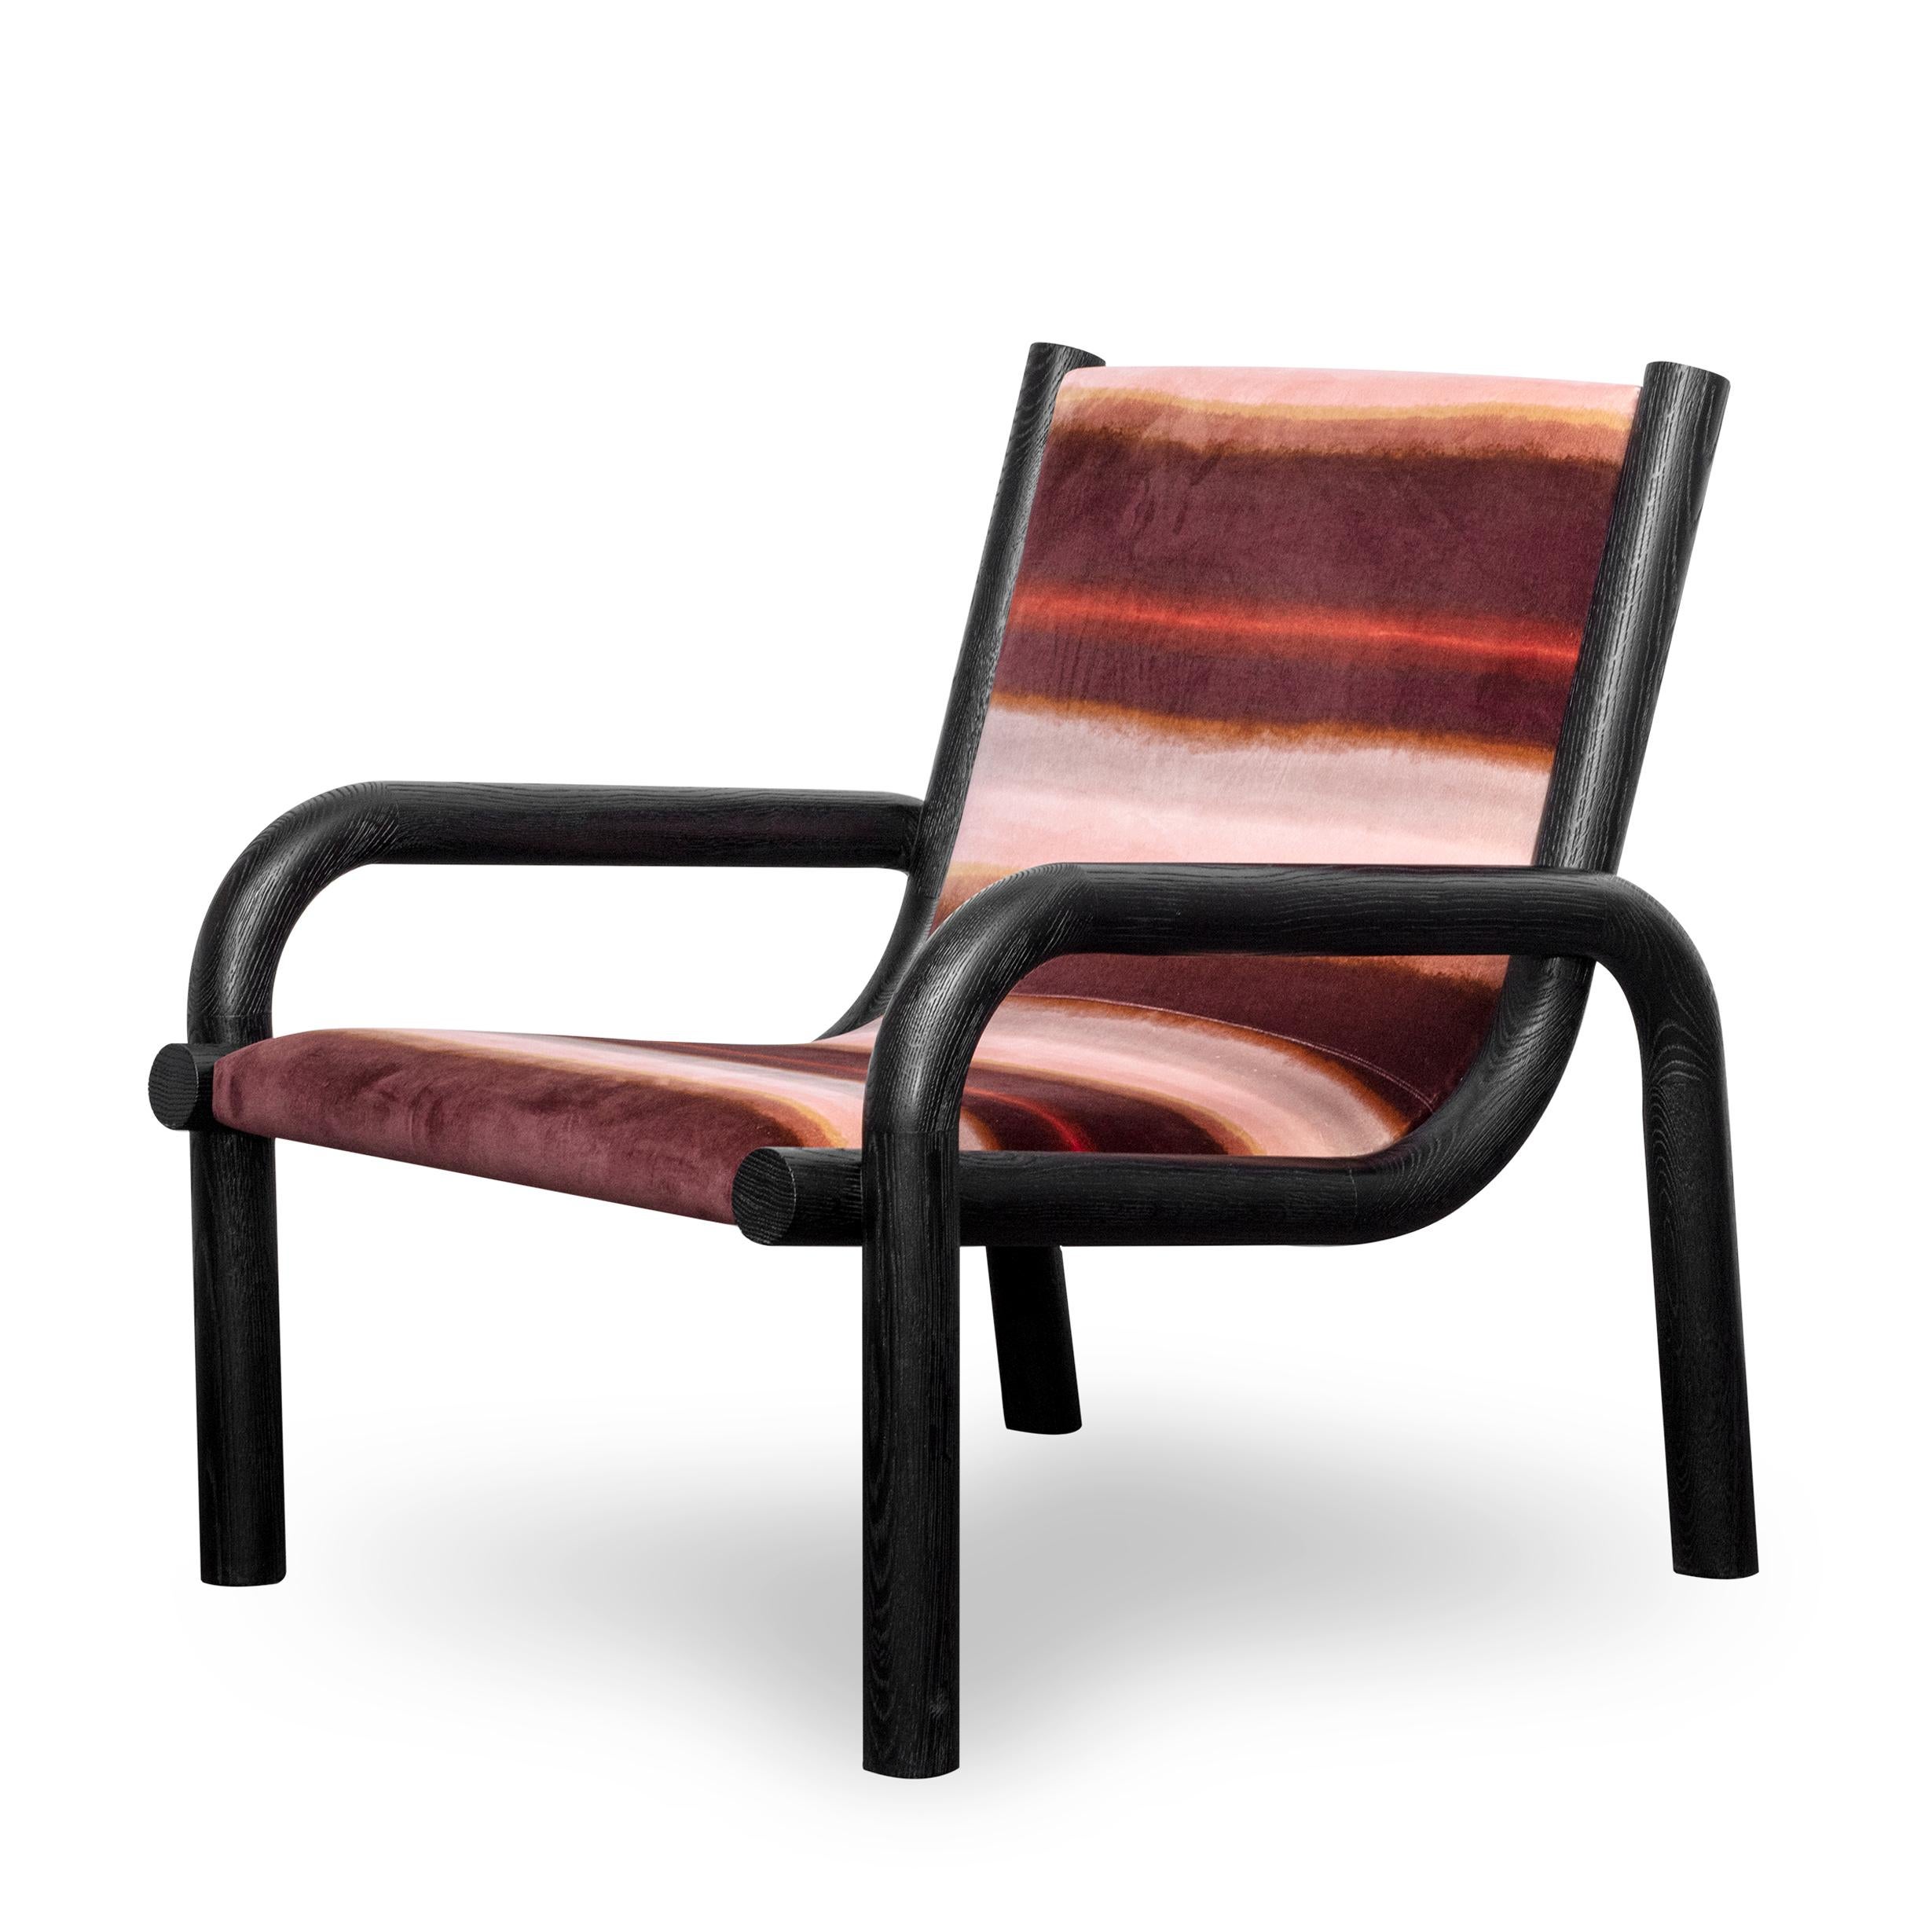 Ginga Armchair by Duistt
Dimensions: W 82 x D 89 x H 85 cm
Materials: Lelievre Esterel 03 fabric, Solid Black Oak

Ginga is the swaying movement of Brazilian martial art, Capoeira. It is characterized by a flowing movement from one side to the